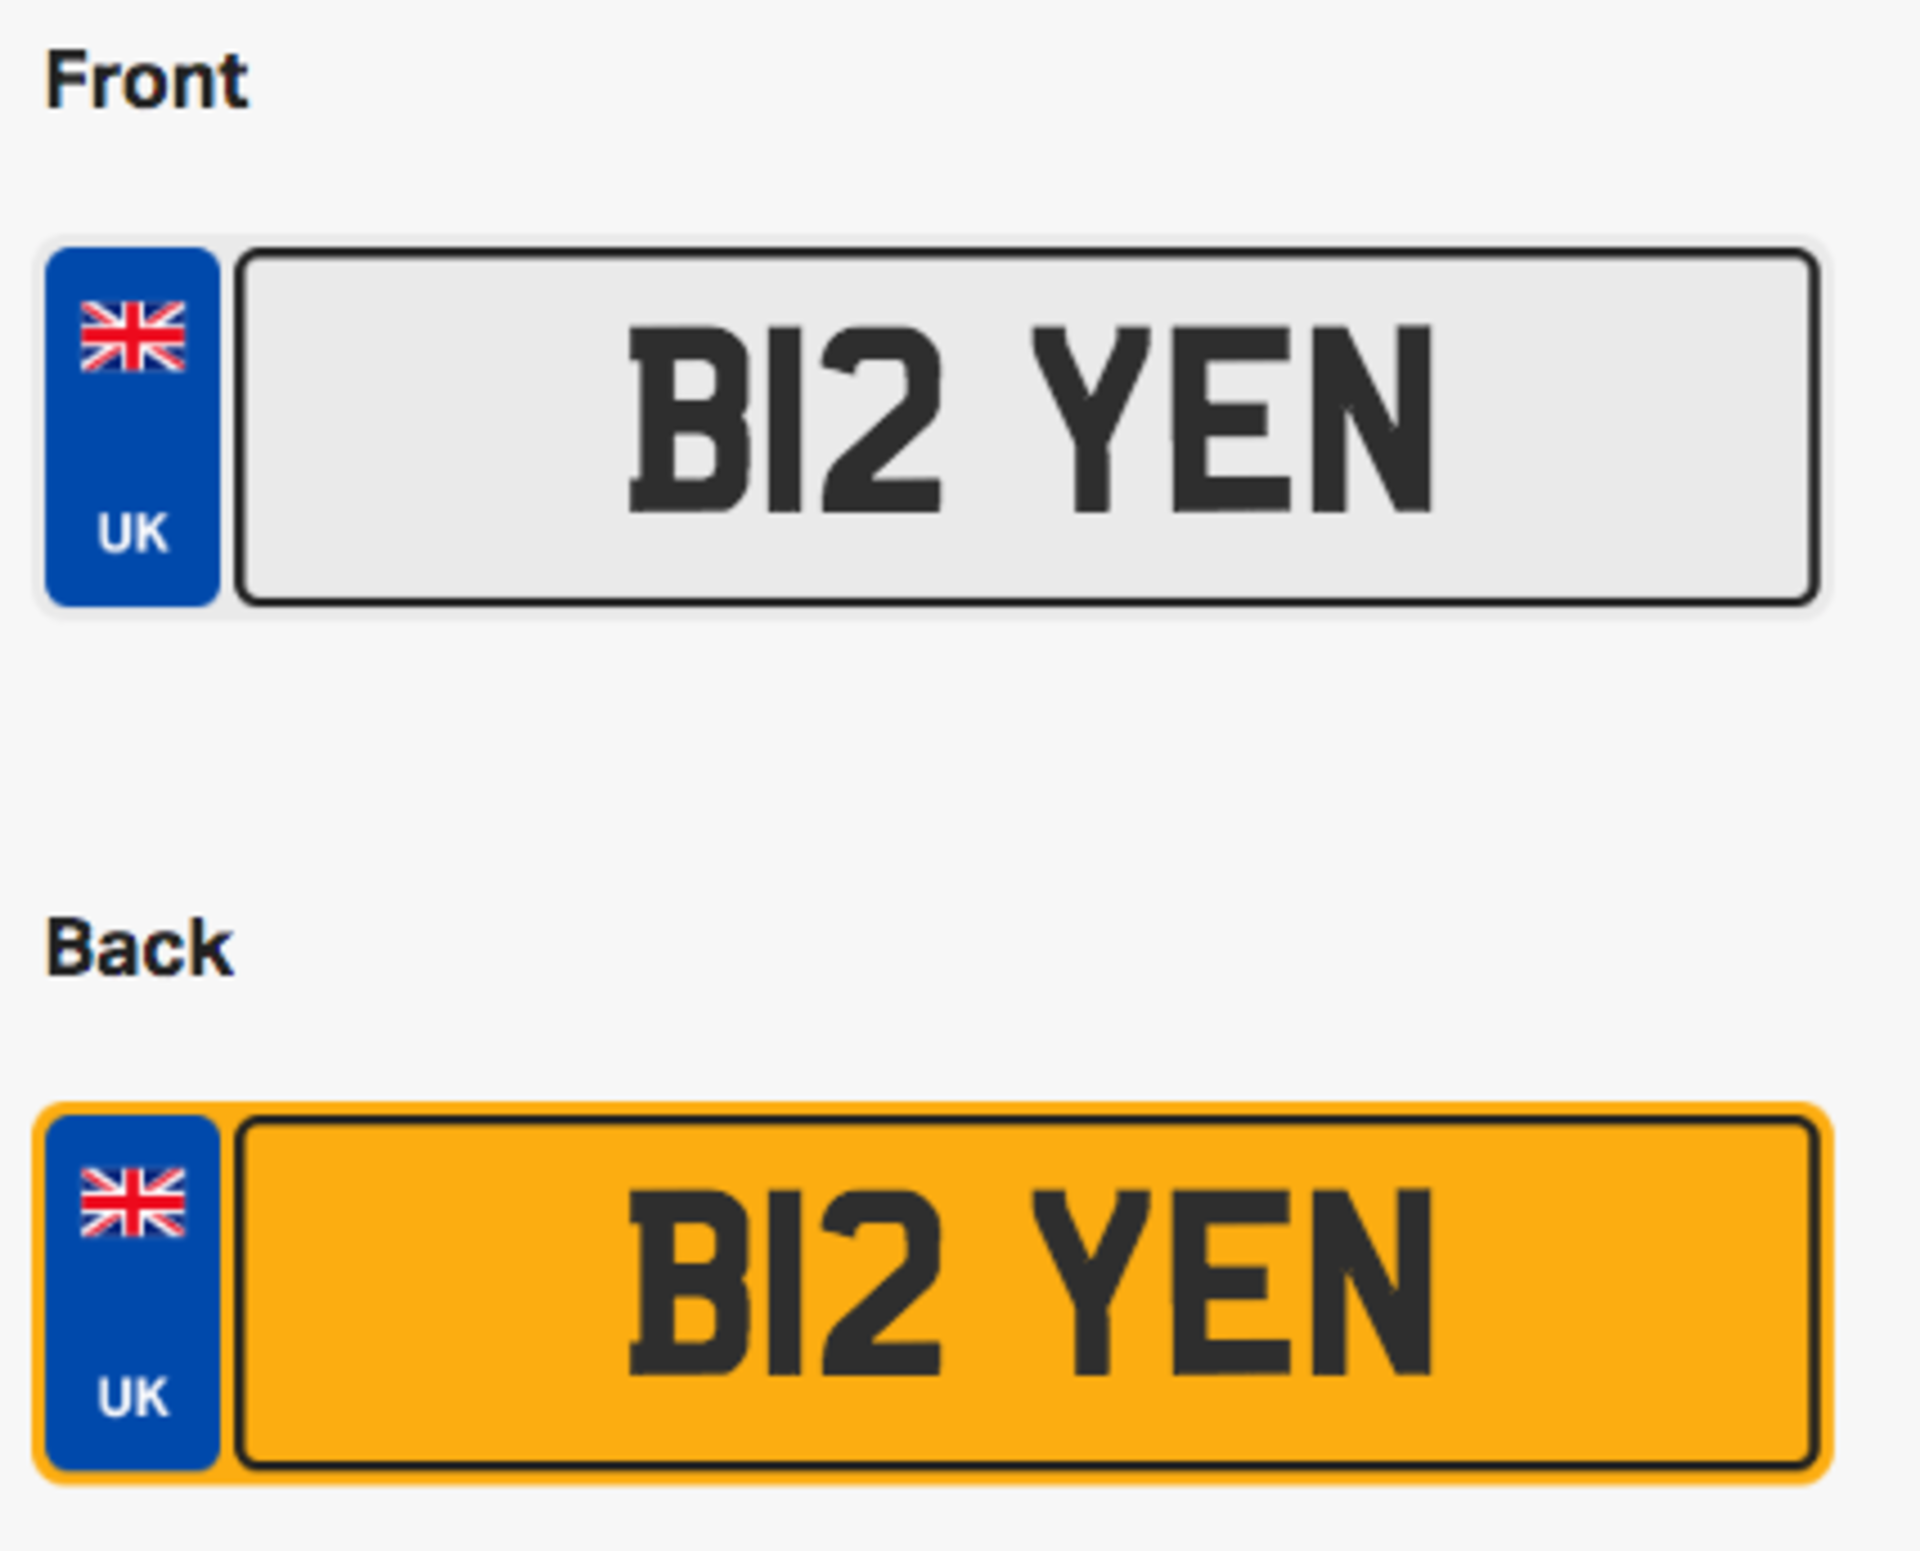 B12 YEN. Private vehicle registration number plate, ready to transfer to new owner